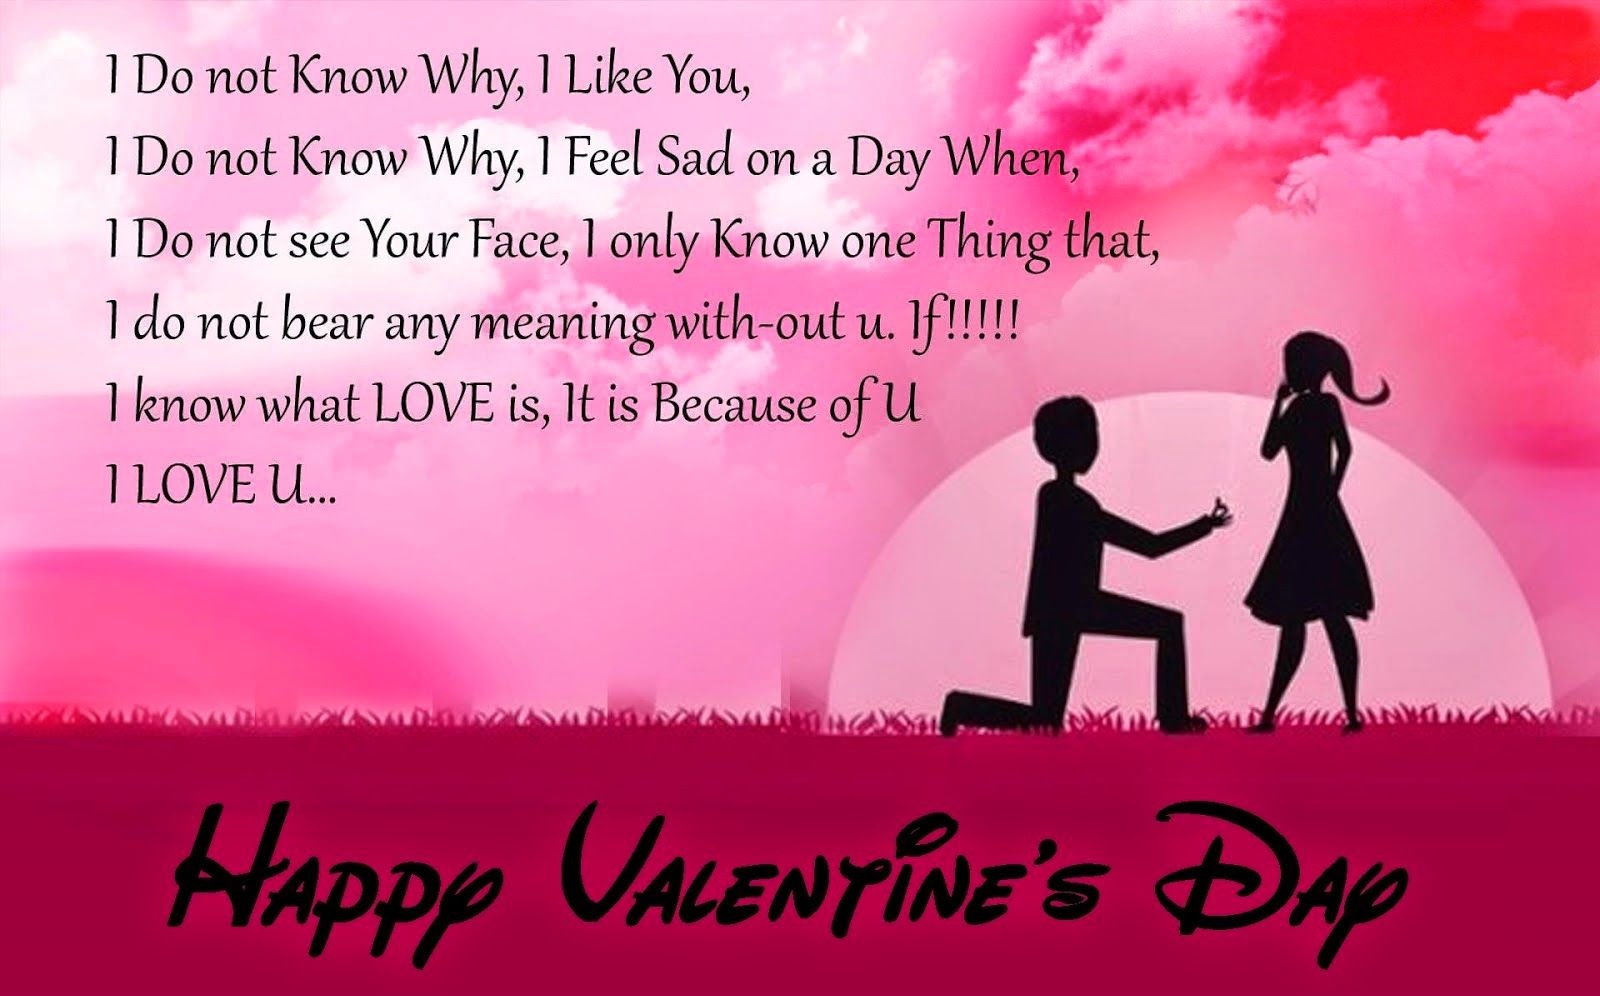 53 Romantic Valentine's Day Messages & Quotes